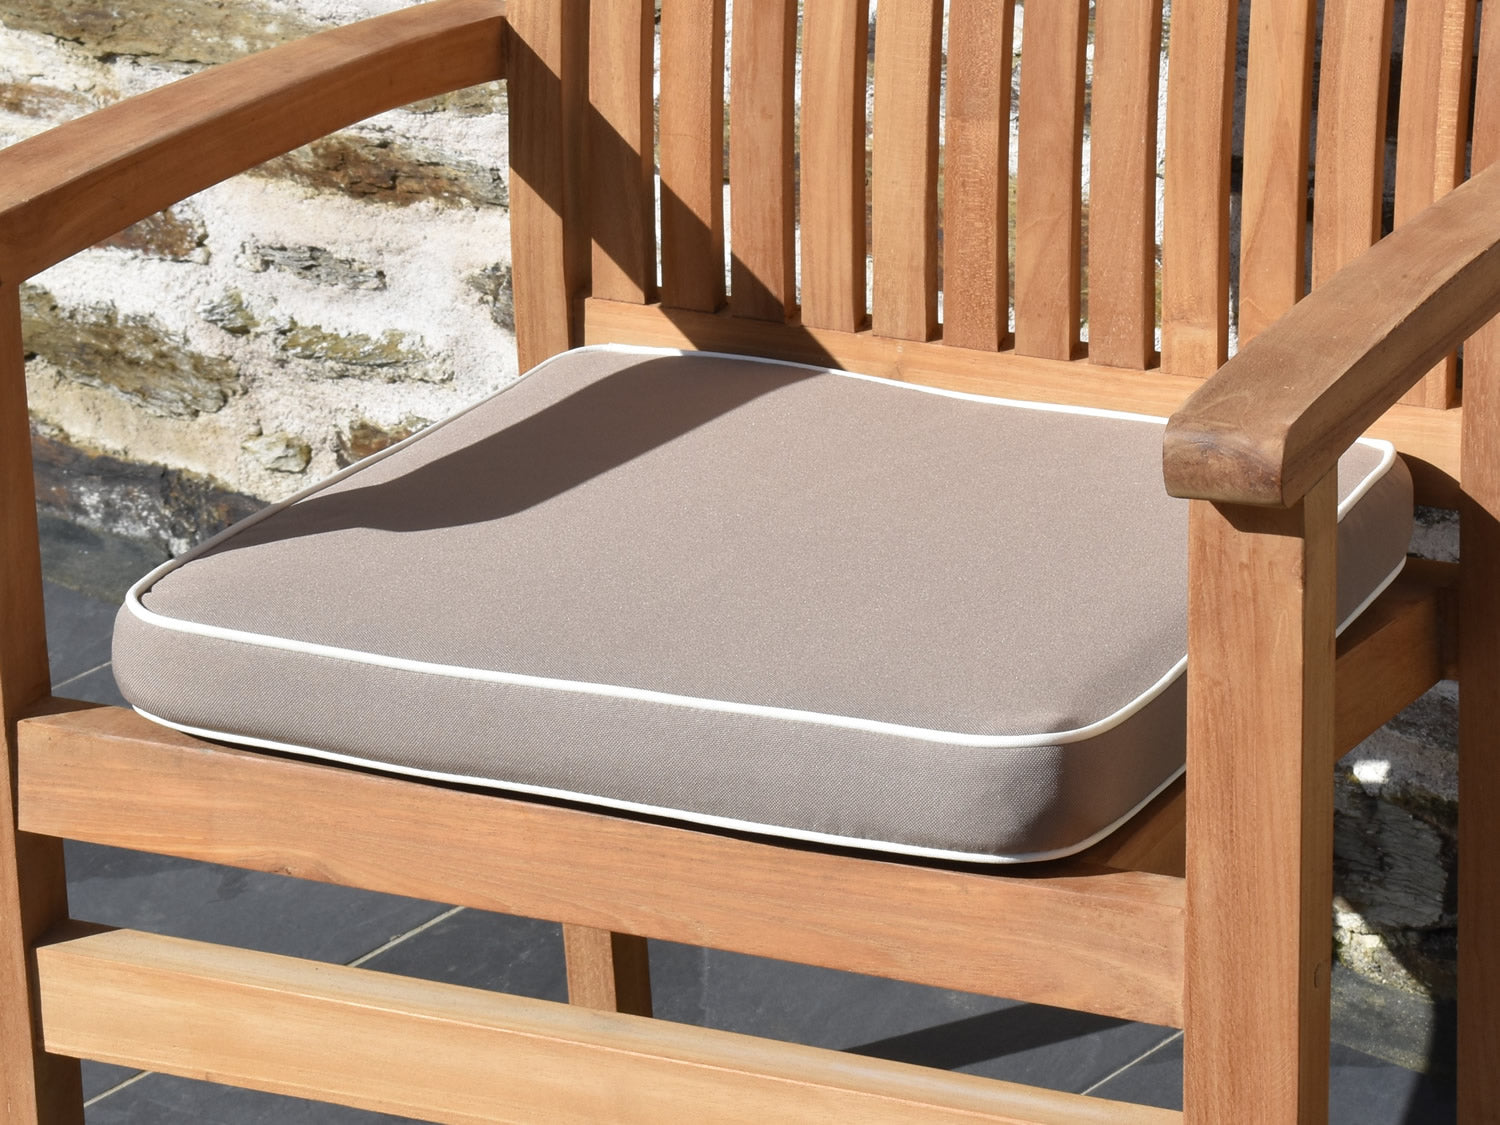 Luxury large outdoor garden seat pad, Taupe with White piping, close view